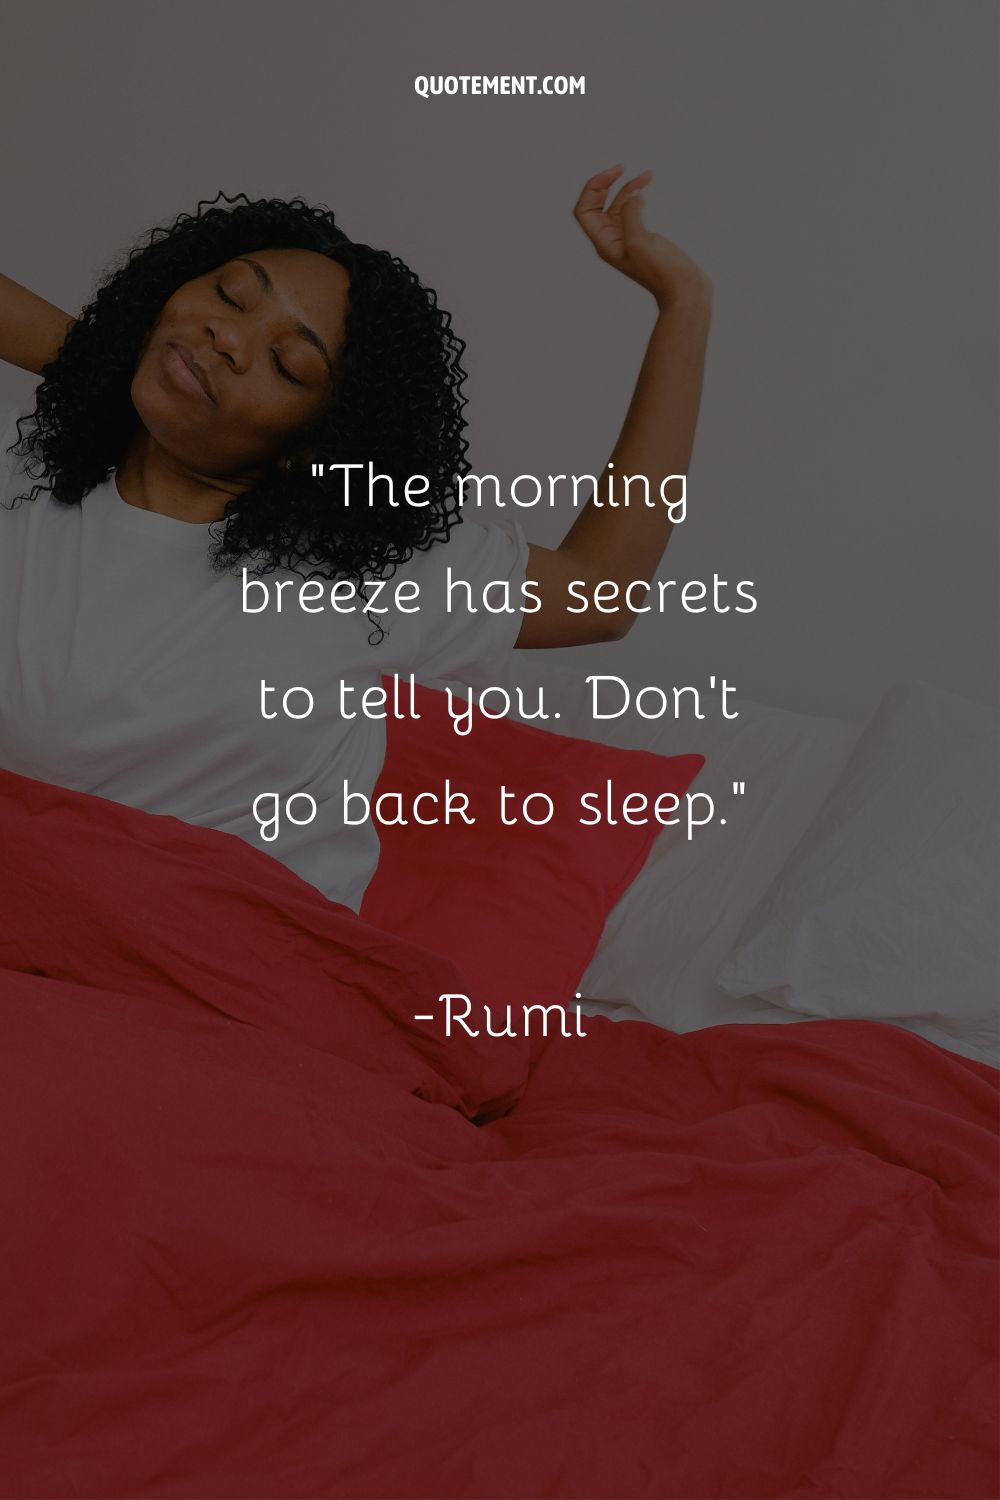 The morning breeze has secrets to tell you. Don’t go back to sleep